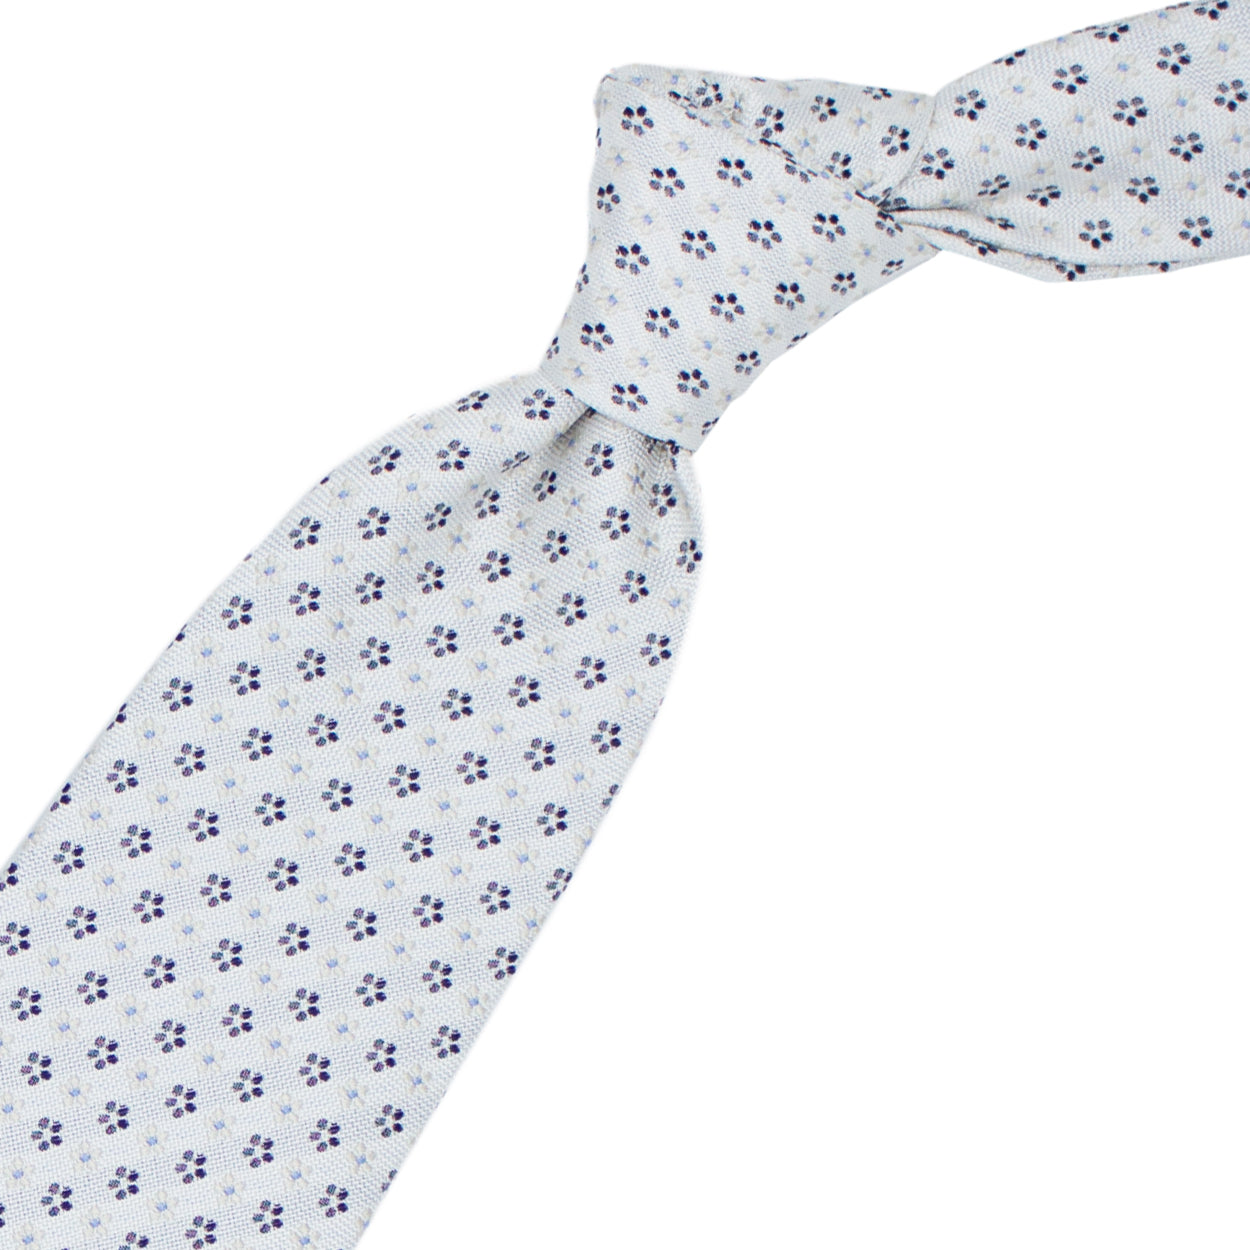 White tie with white and grey flowers and blue dots